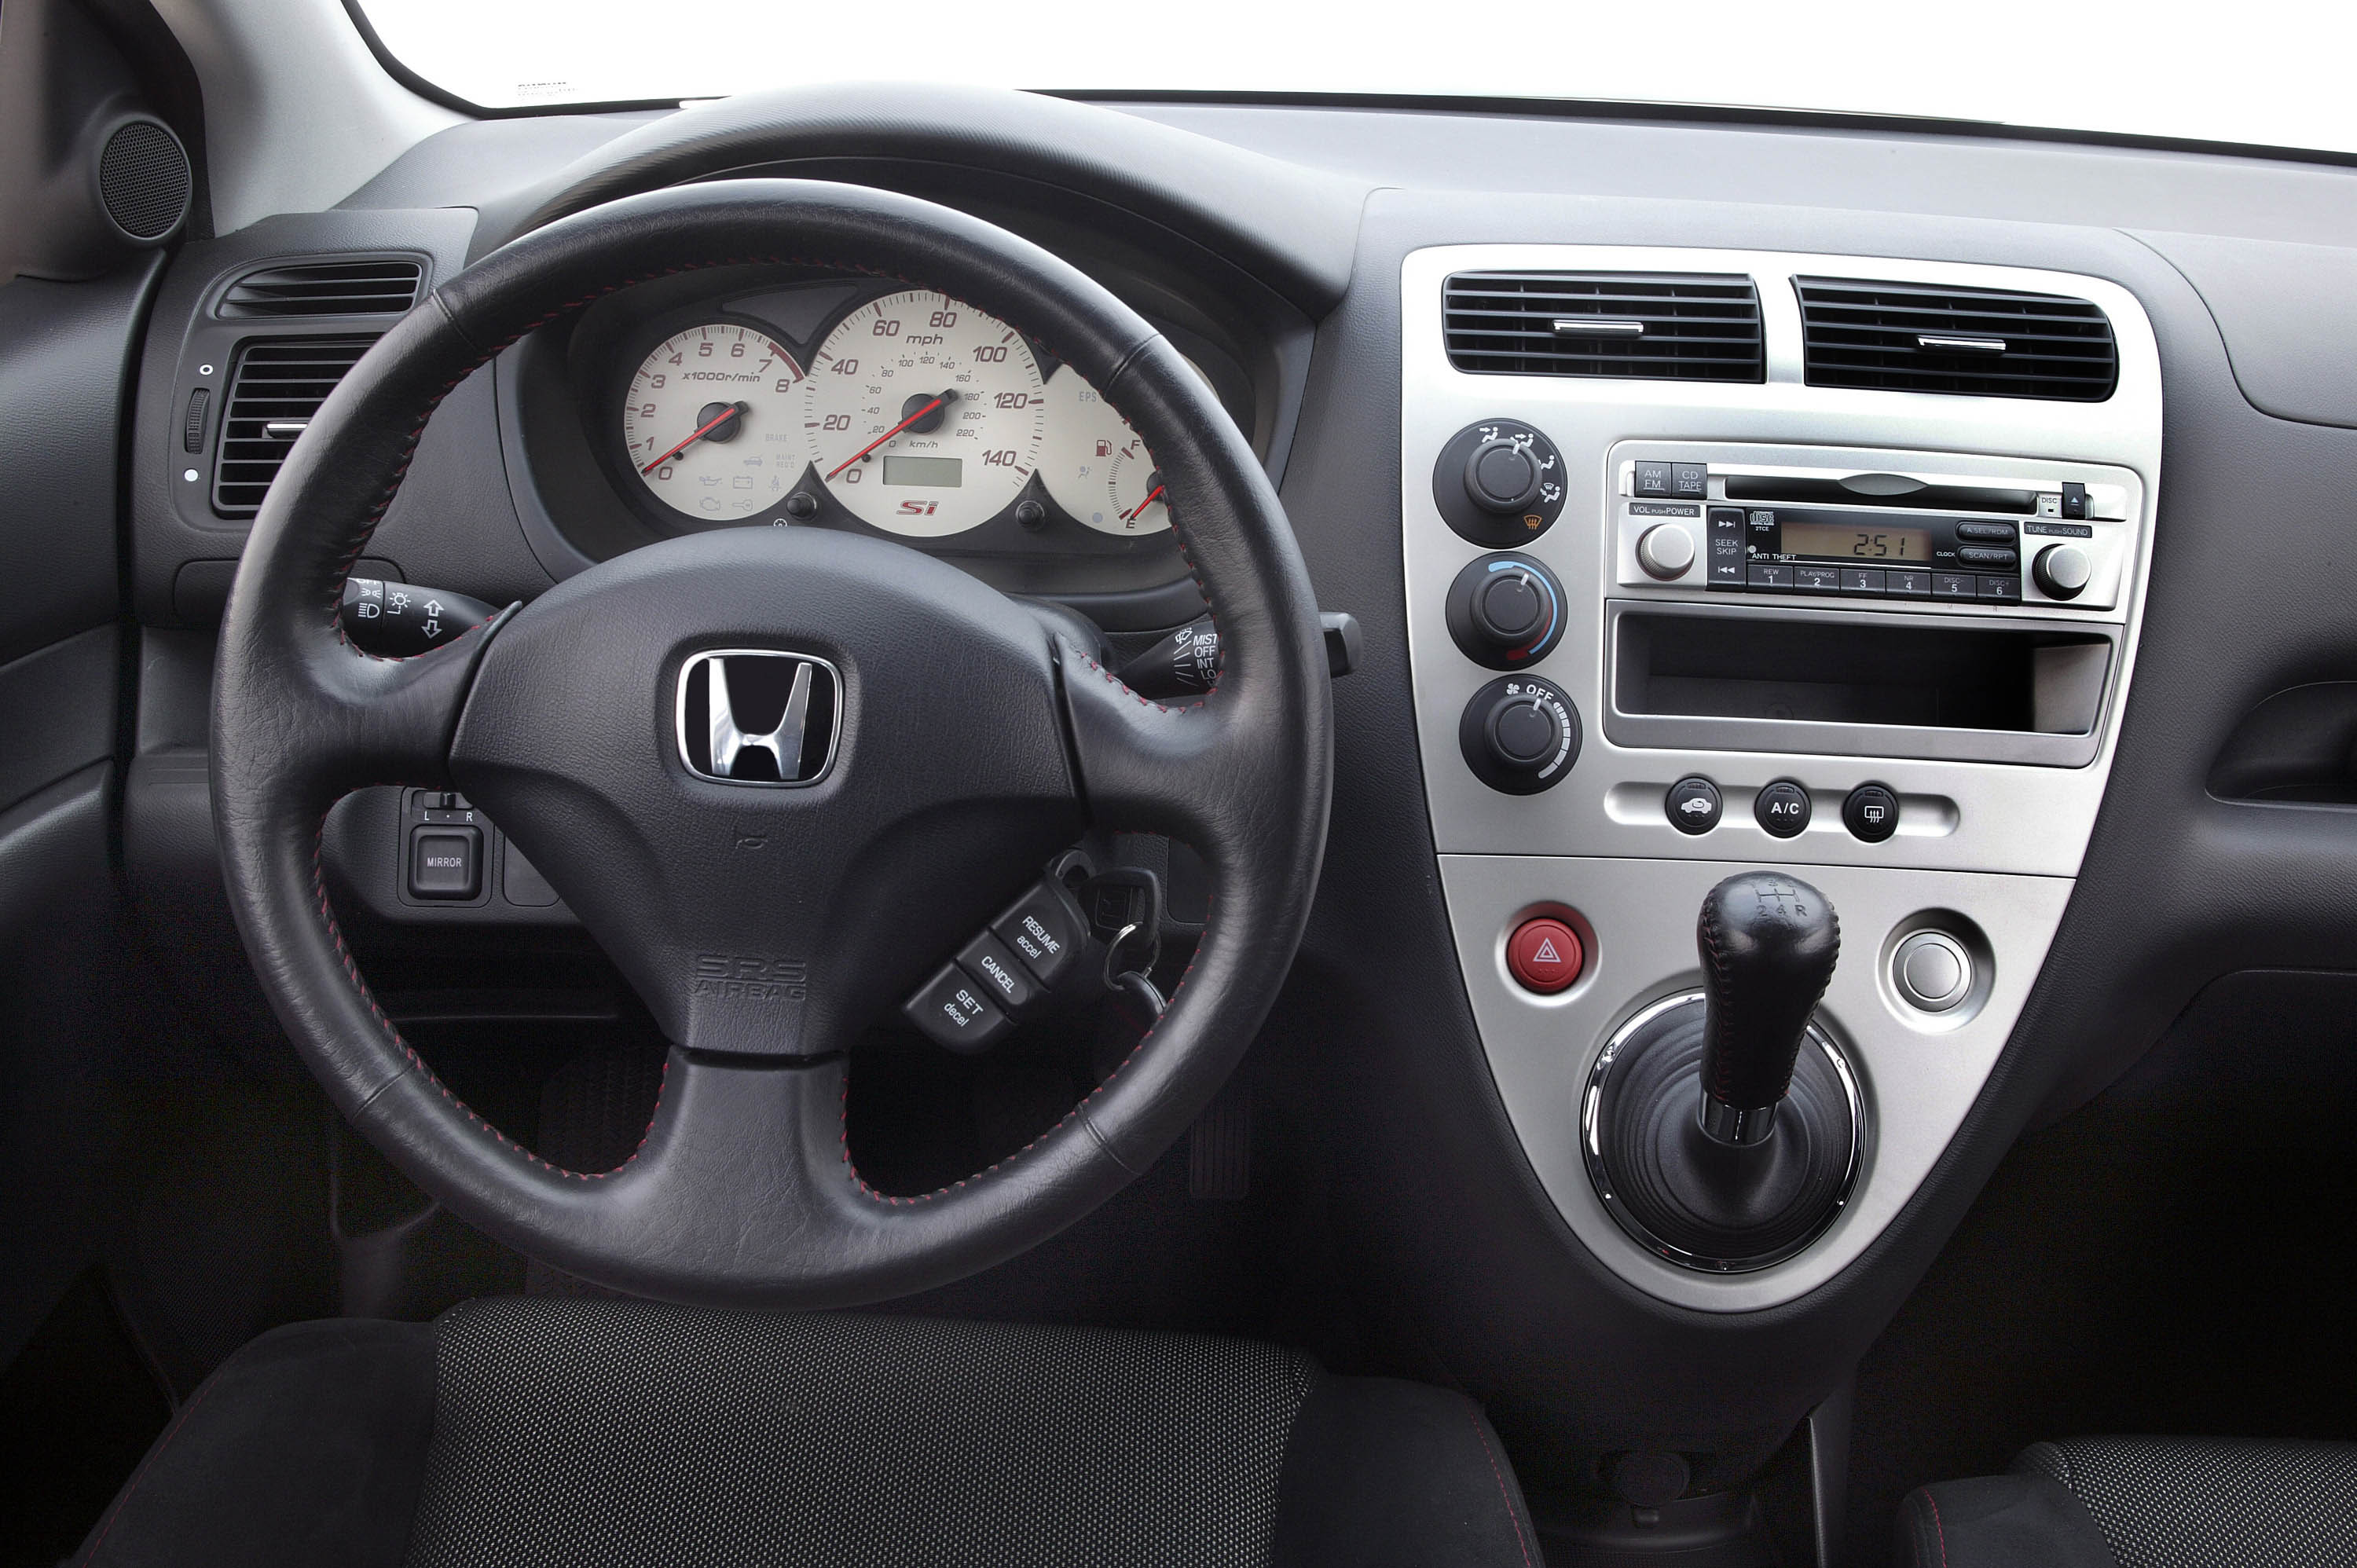 Honda Civic Si picture # 14 of 15, MY 2004, size:3000x1996